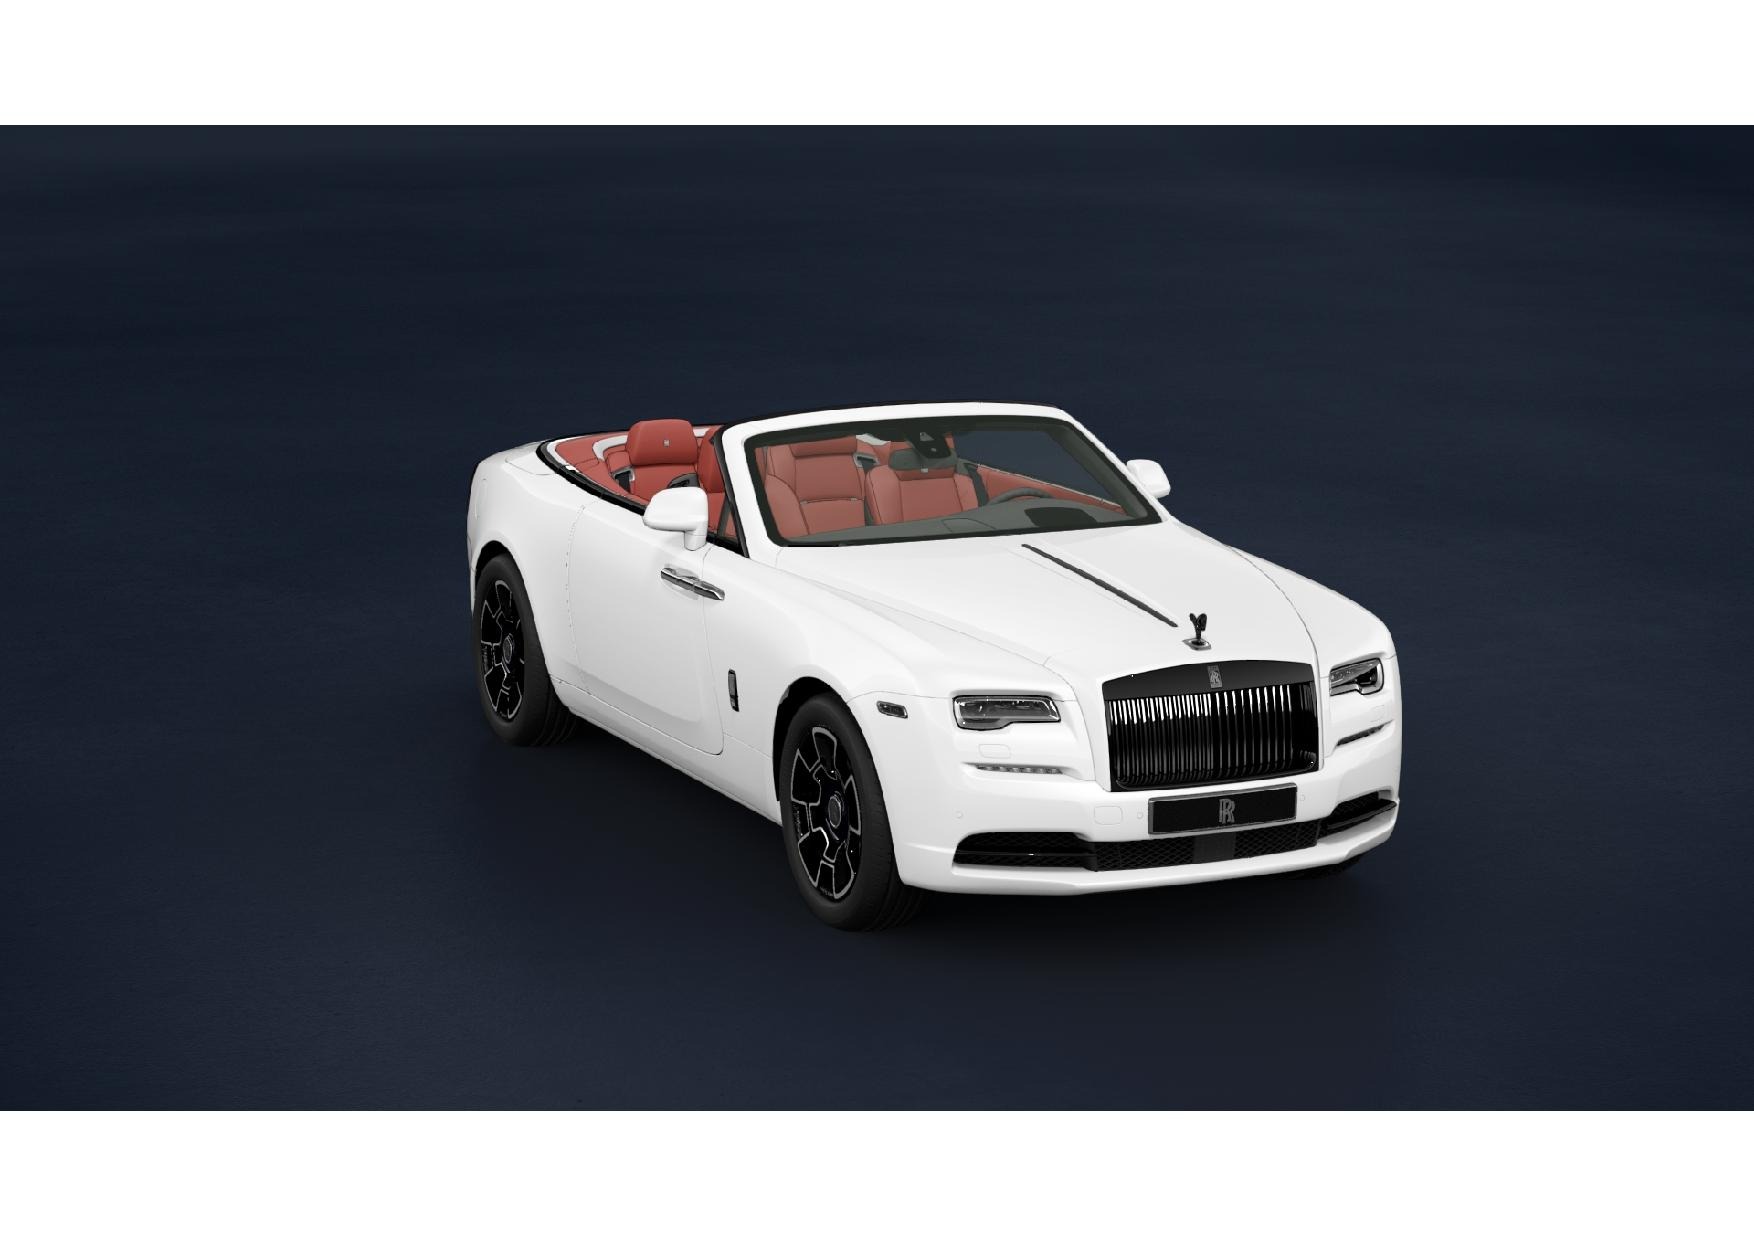 New 2021 Rolls Royce Dawn Black Badge For Sale Special Pricing Rolls Royce Motor Cars 9453